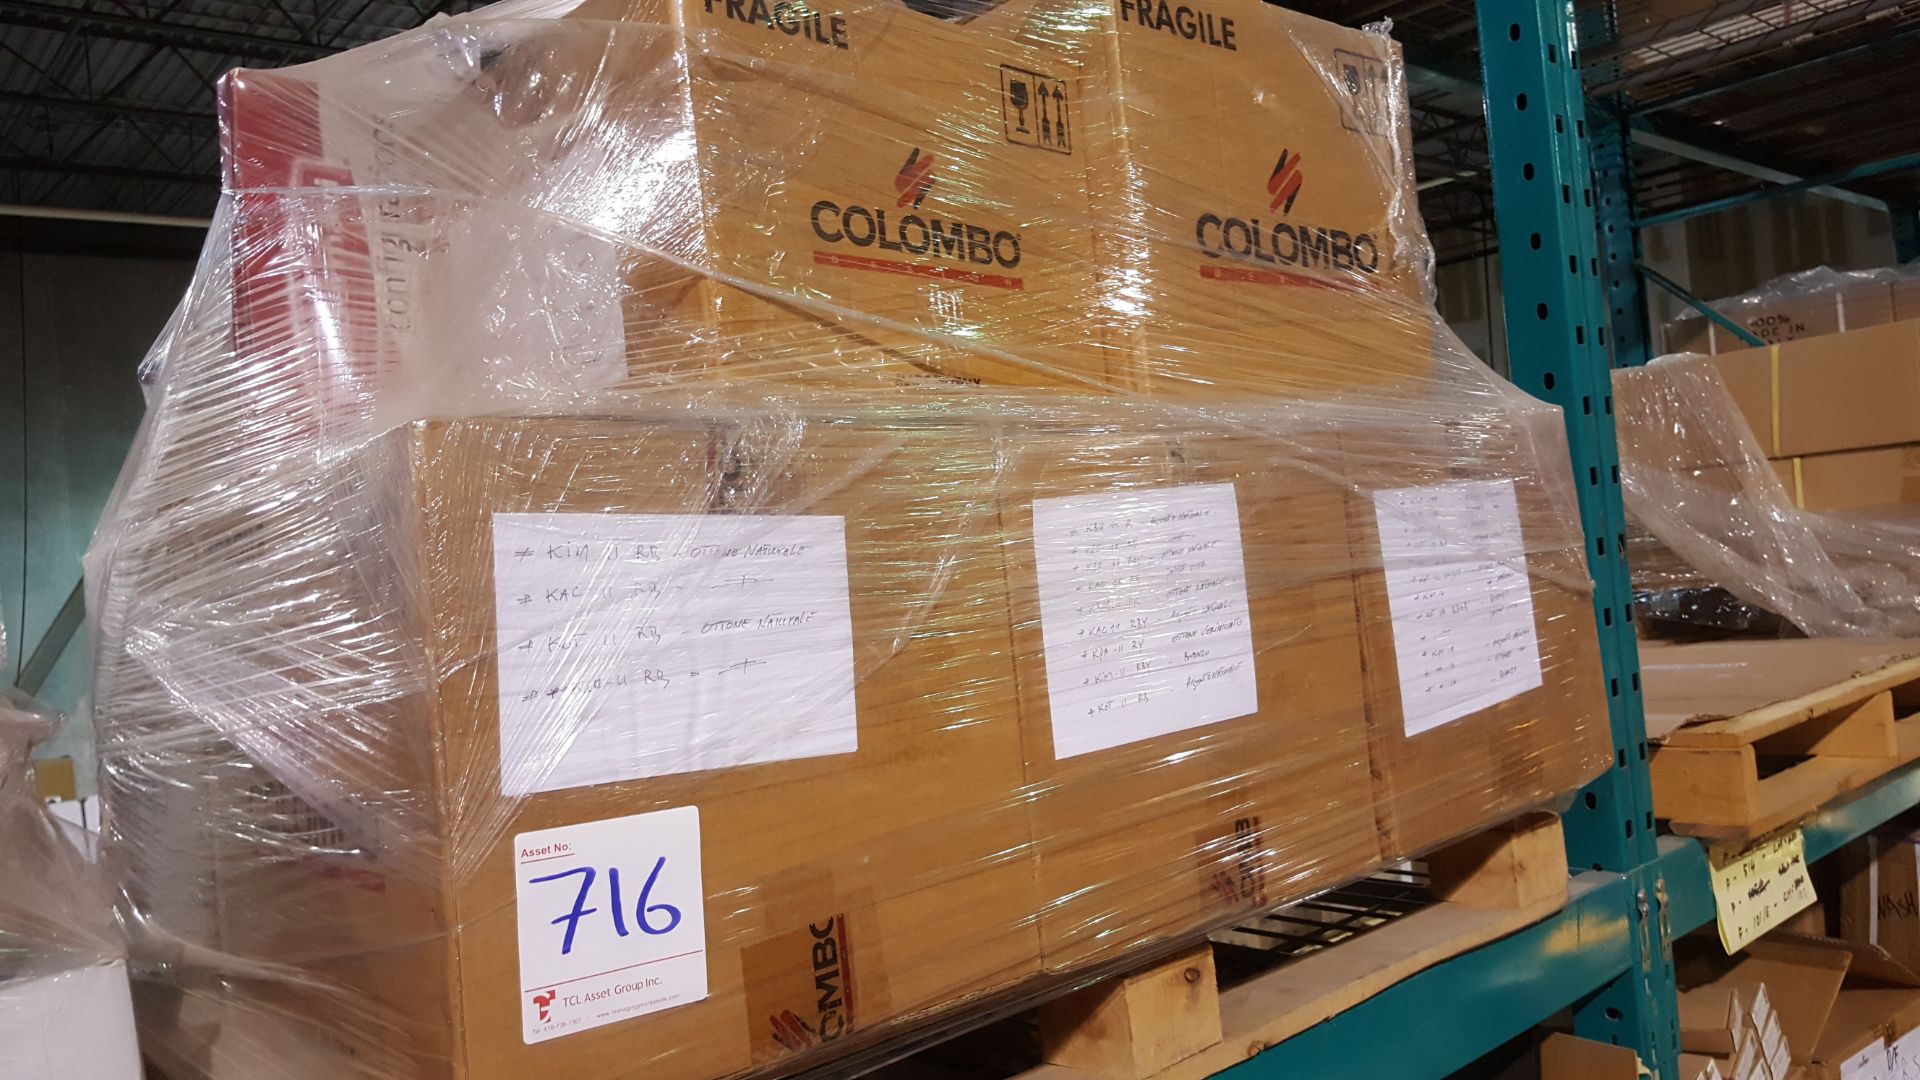 Pallet of Colombo Anthologia door handles approx.120 pieces